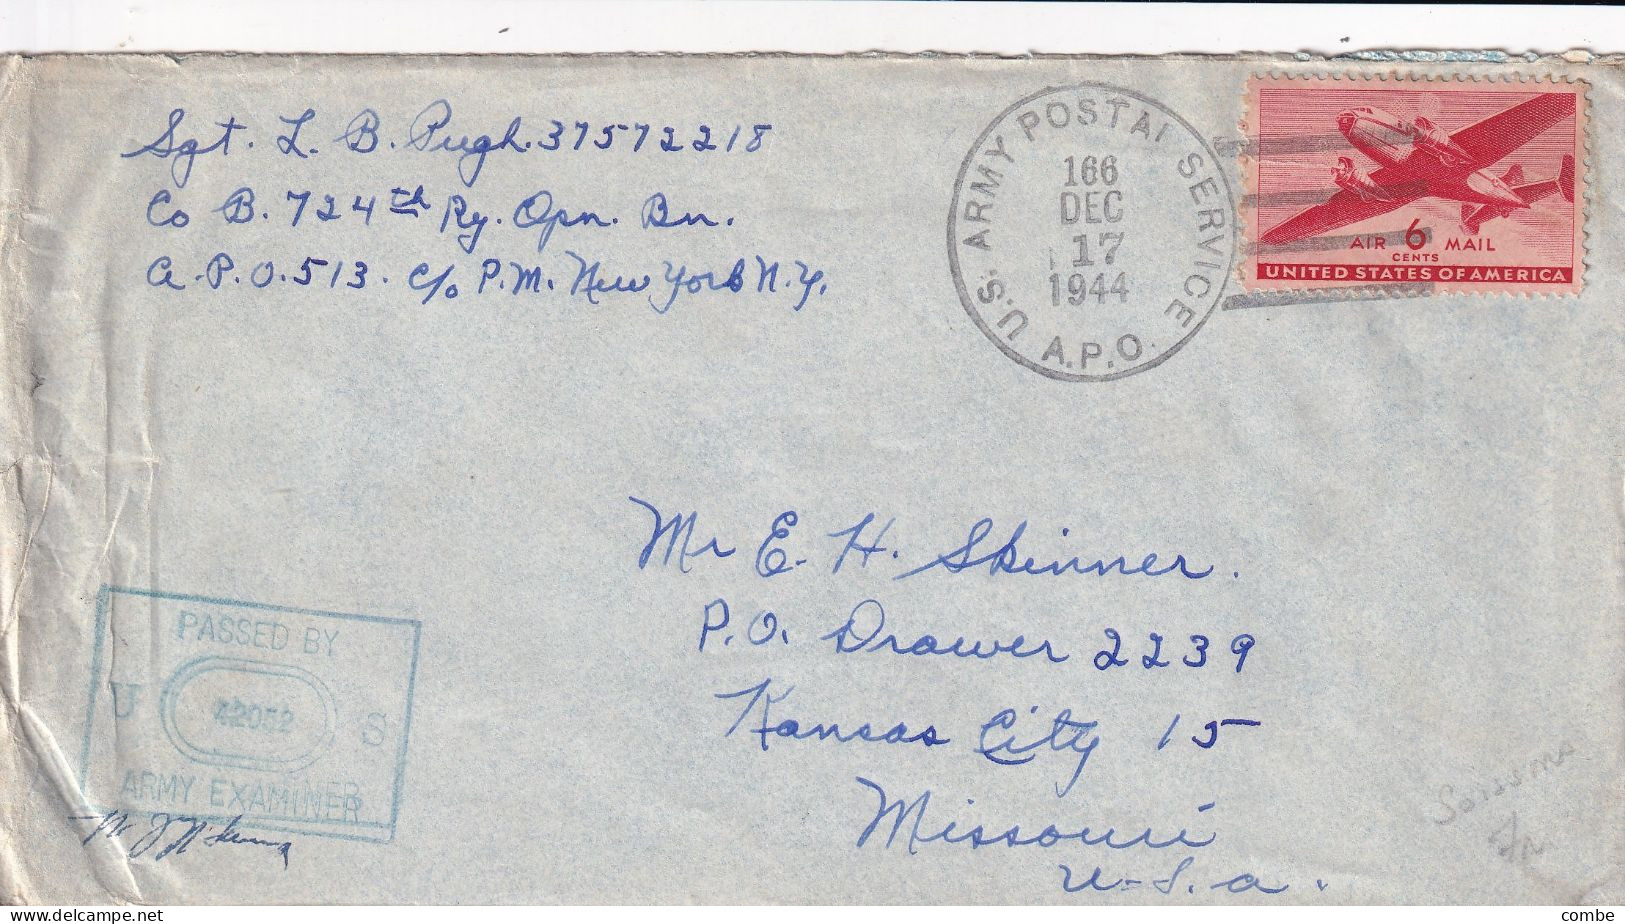 COVER. 17 DEC 1944. APO 166. SOISSONS FRANCE. PASSED BY EXAMINER. TO BALTIMORE - Lettres & Documents